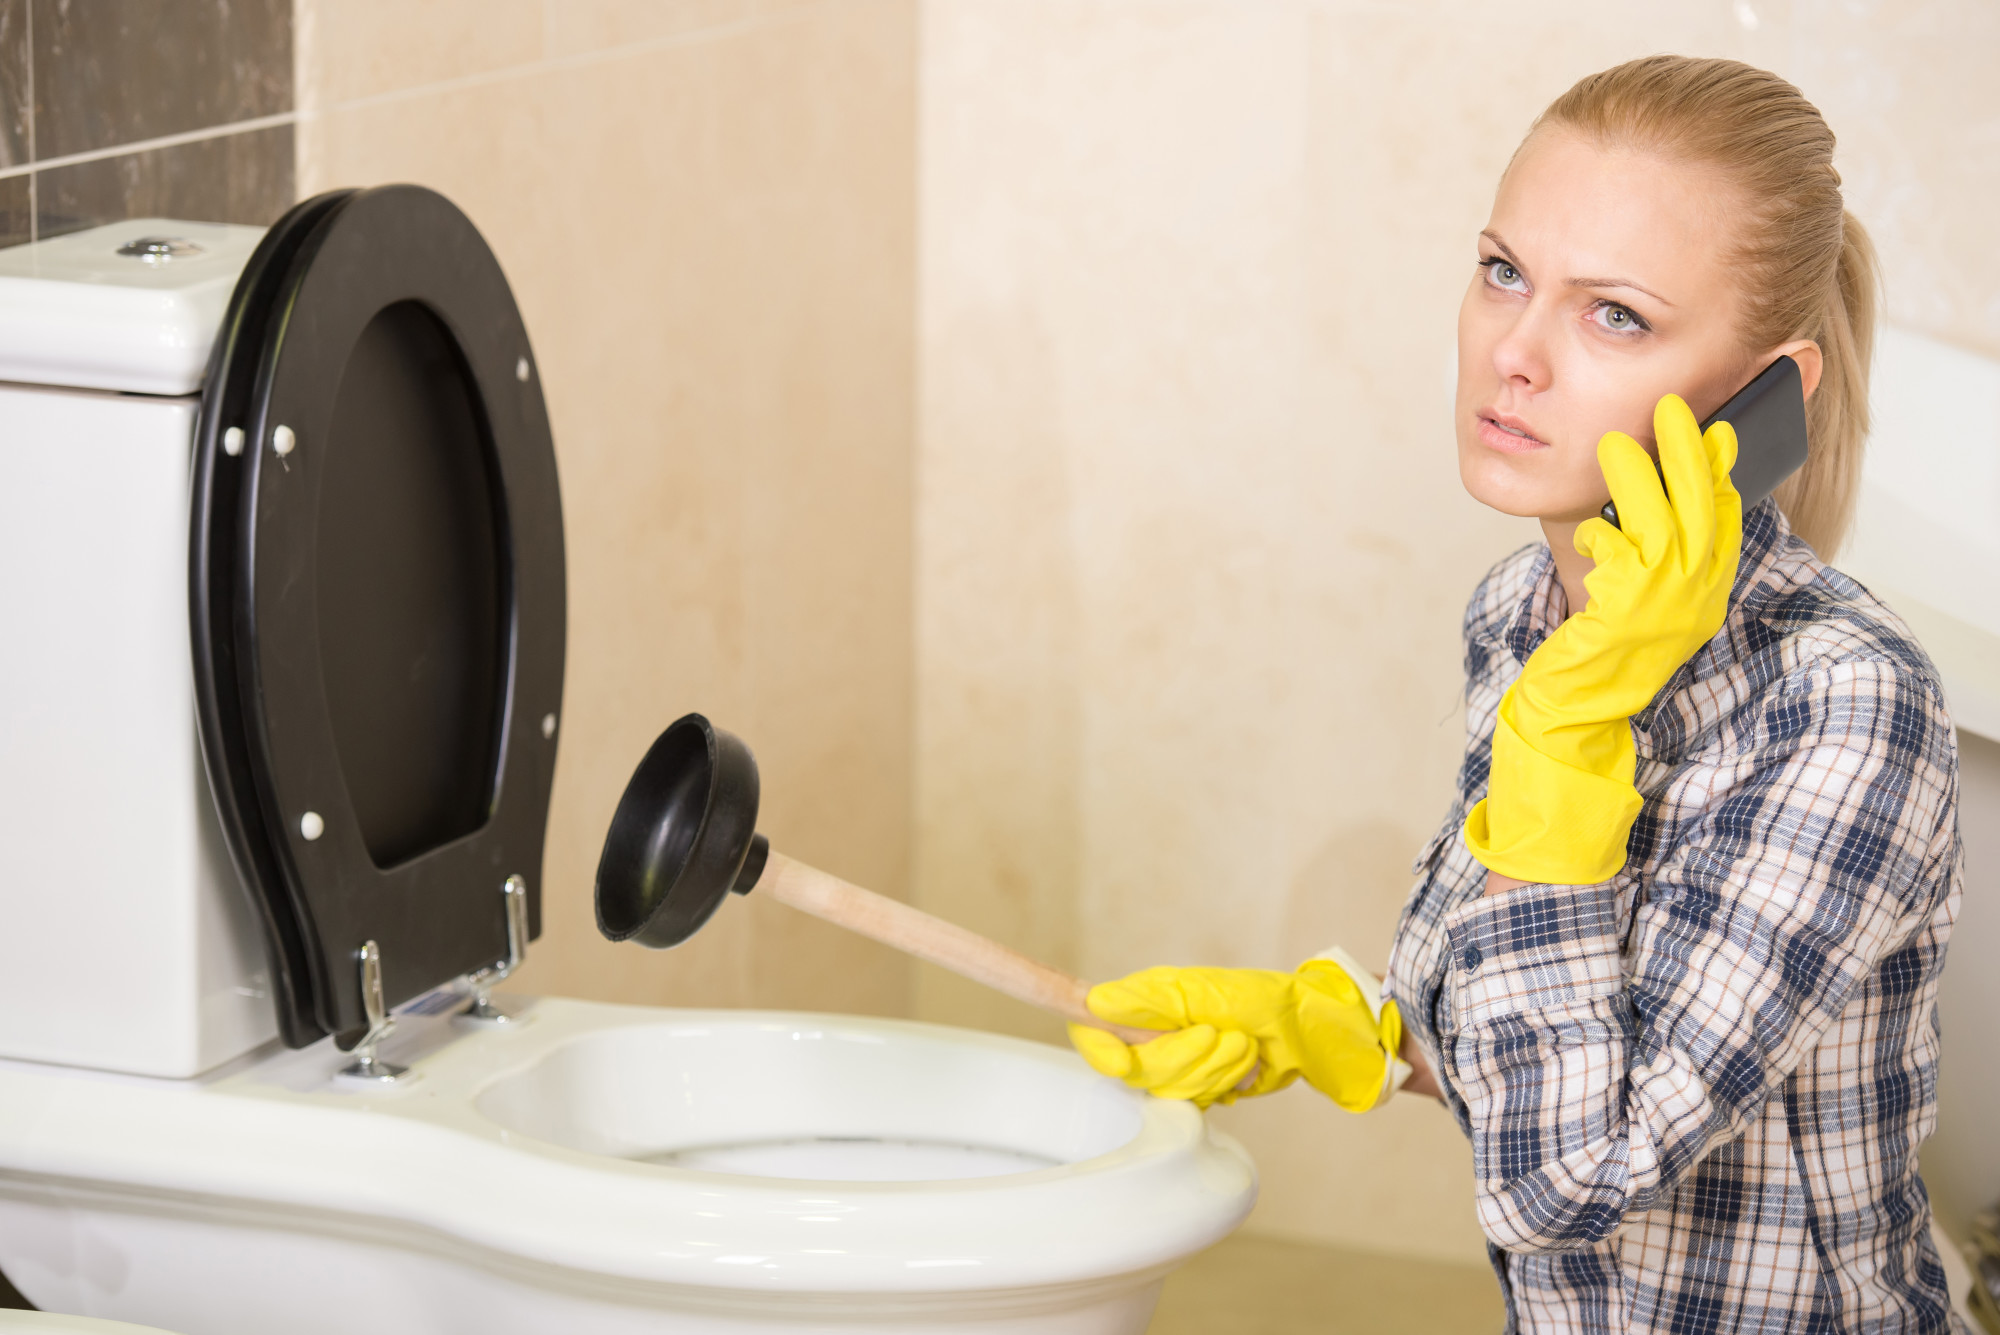 Having a toilet backing up is a very unpleasant experience. Review this guide on tips to unclog your toilet yourself and when to call a plumber.